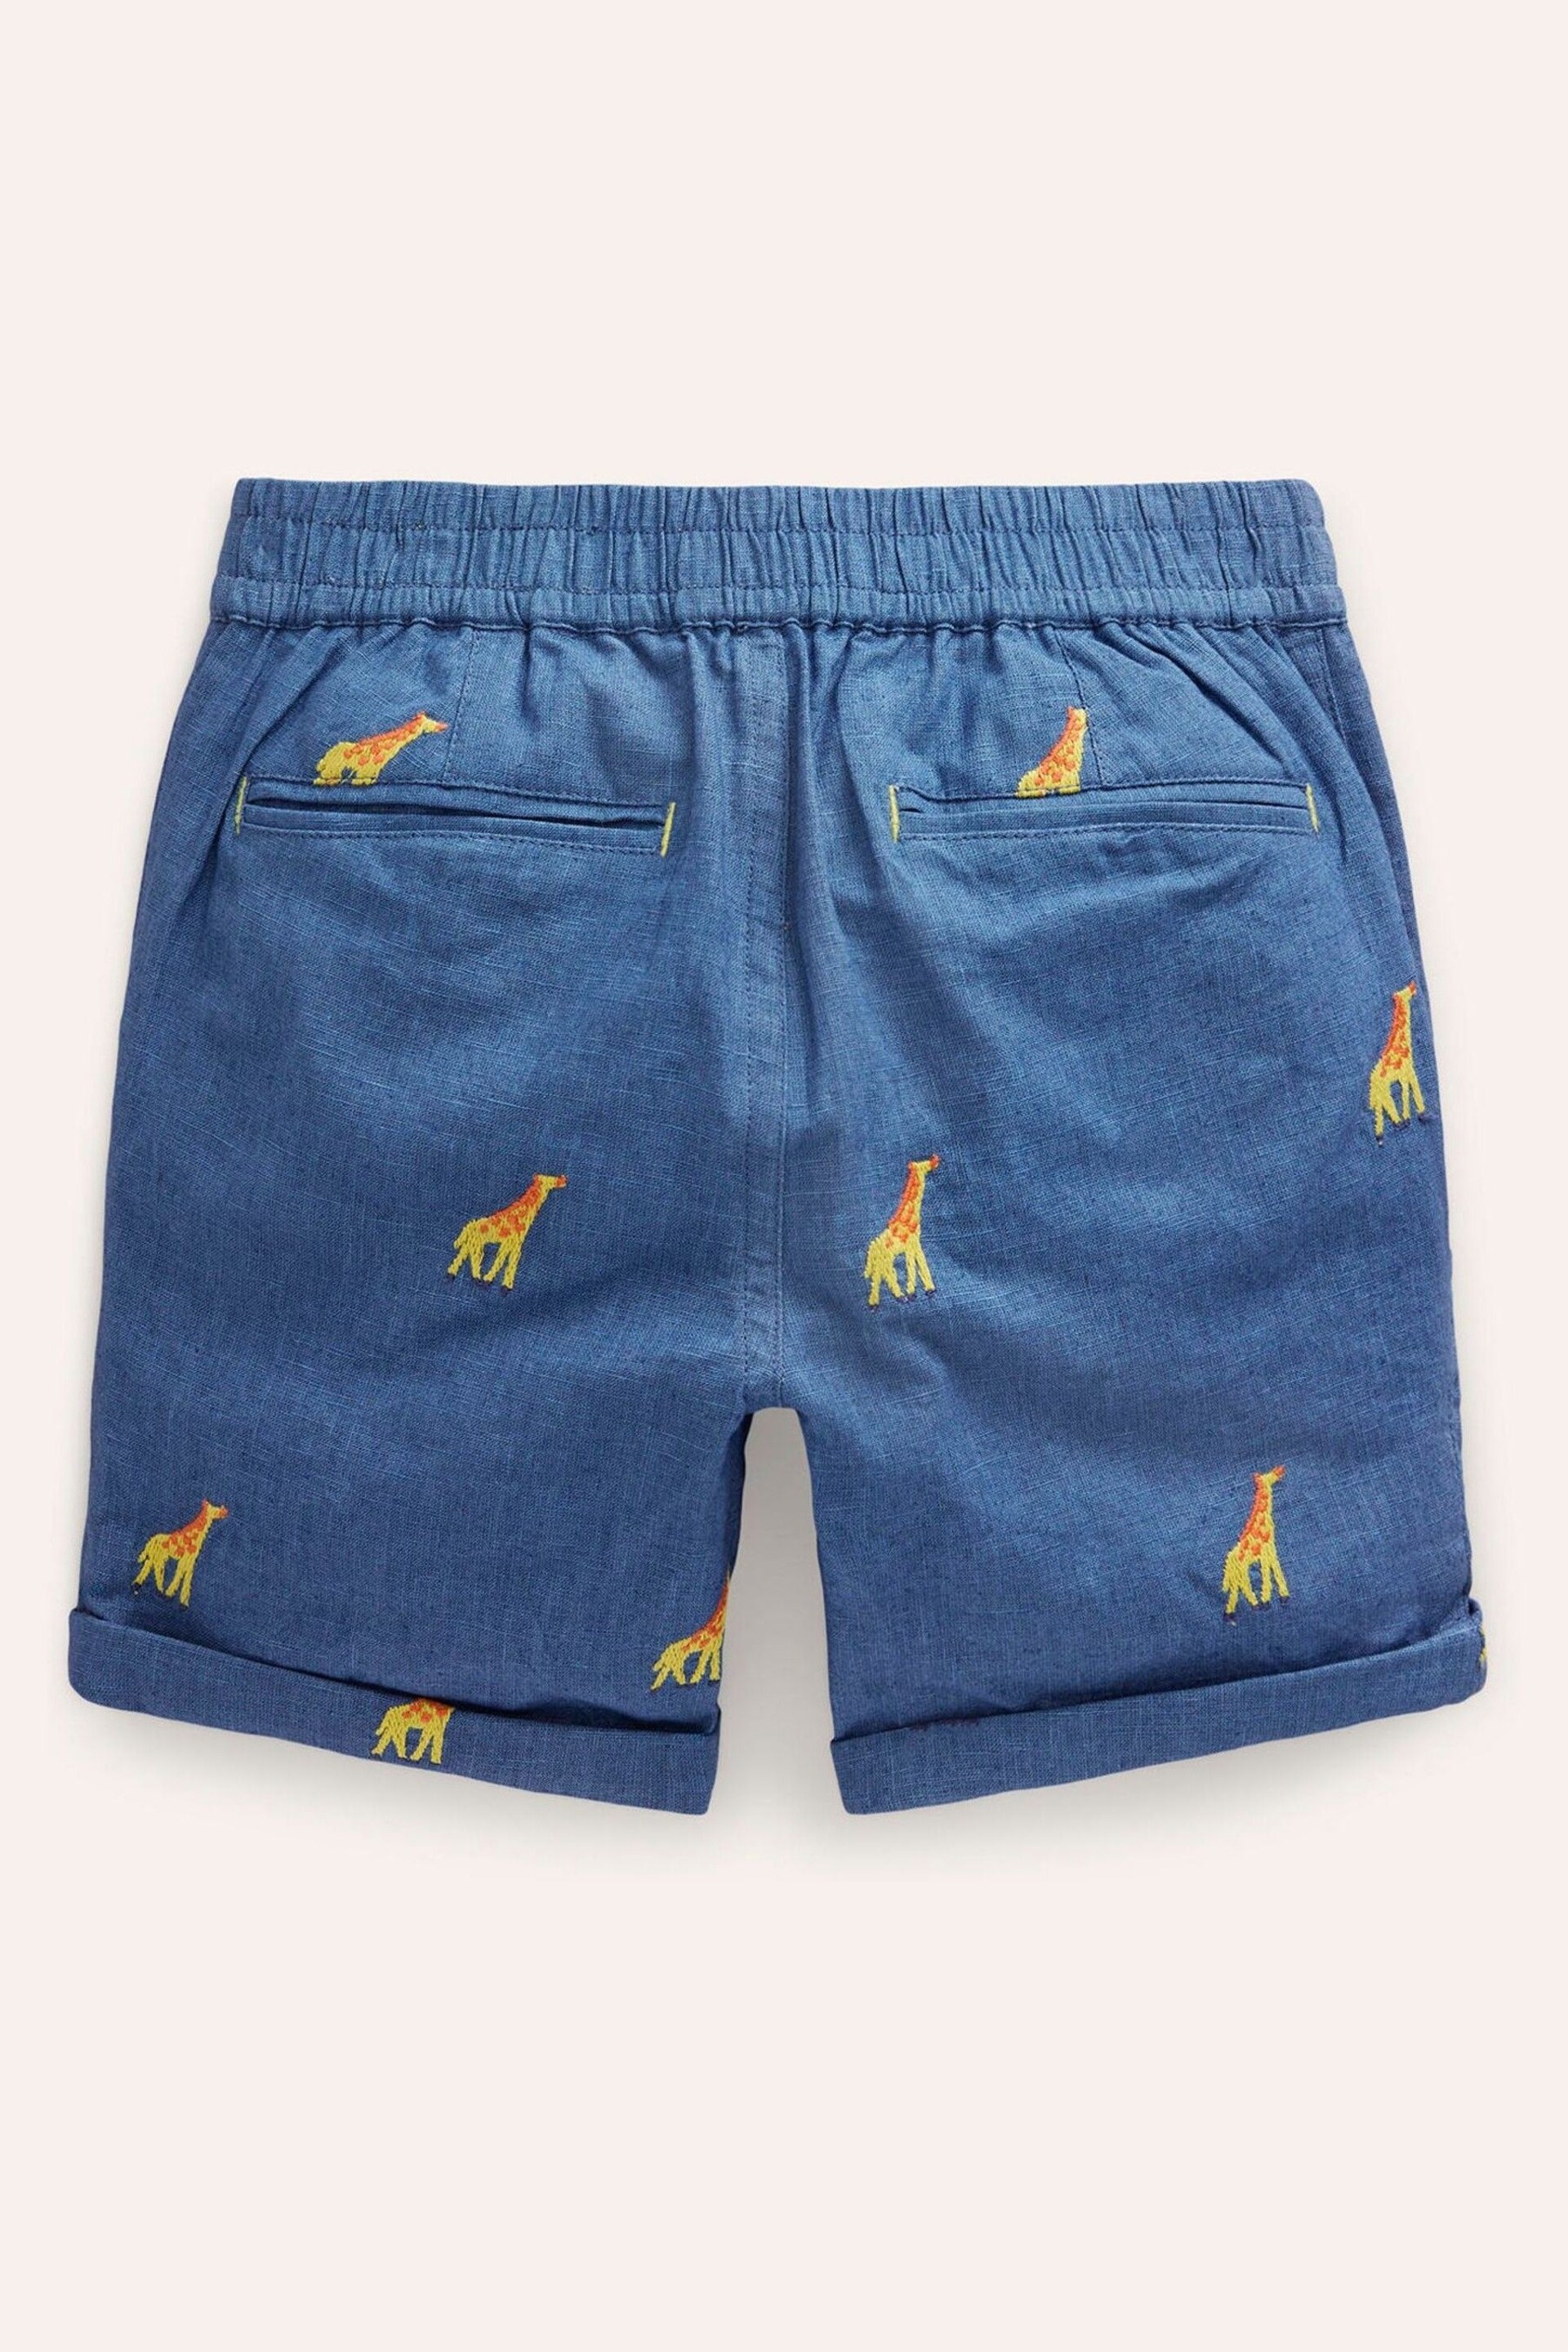 Boden Blue Smart Roll Up Shorts - Image 2 of 3